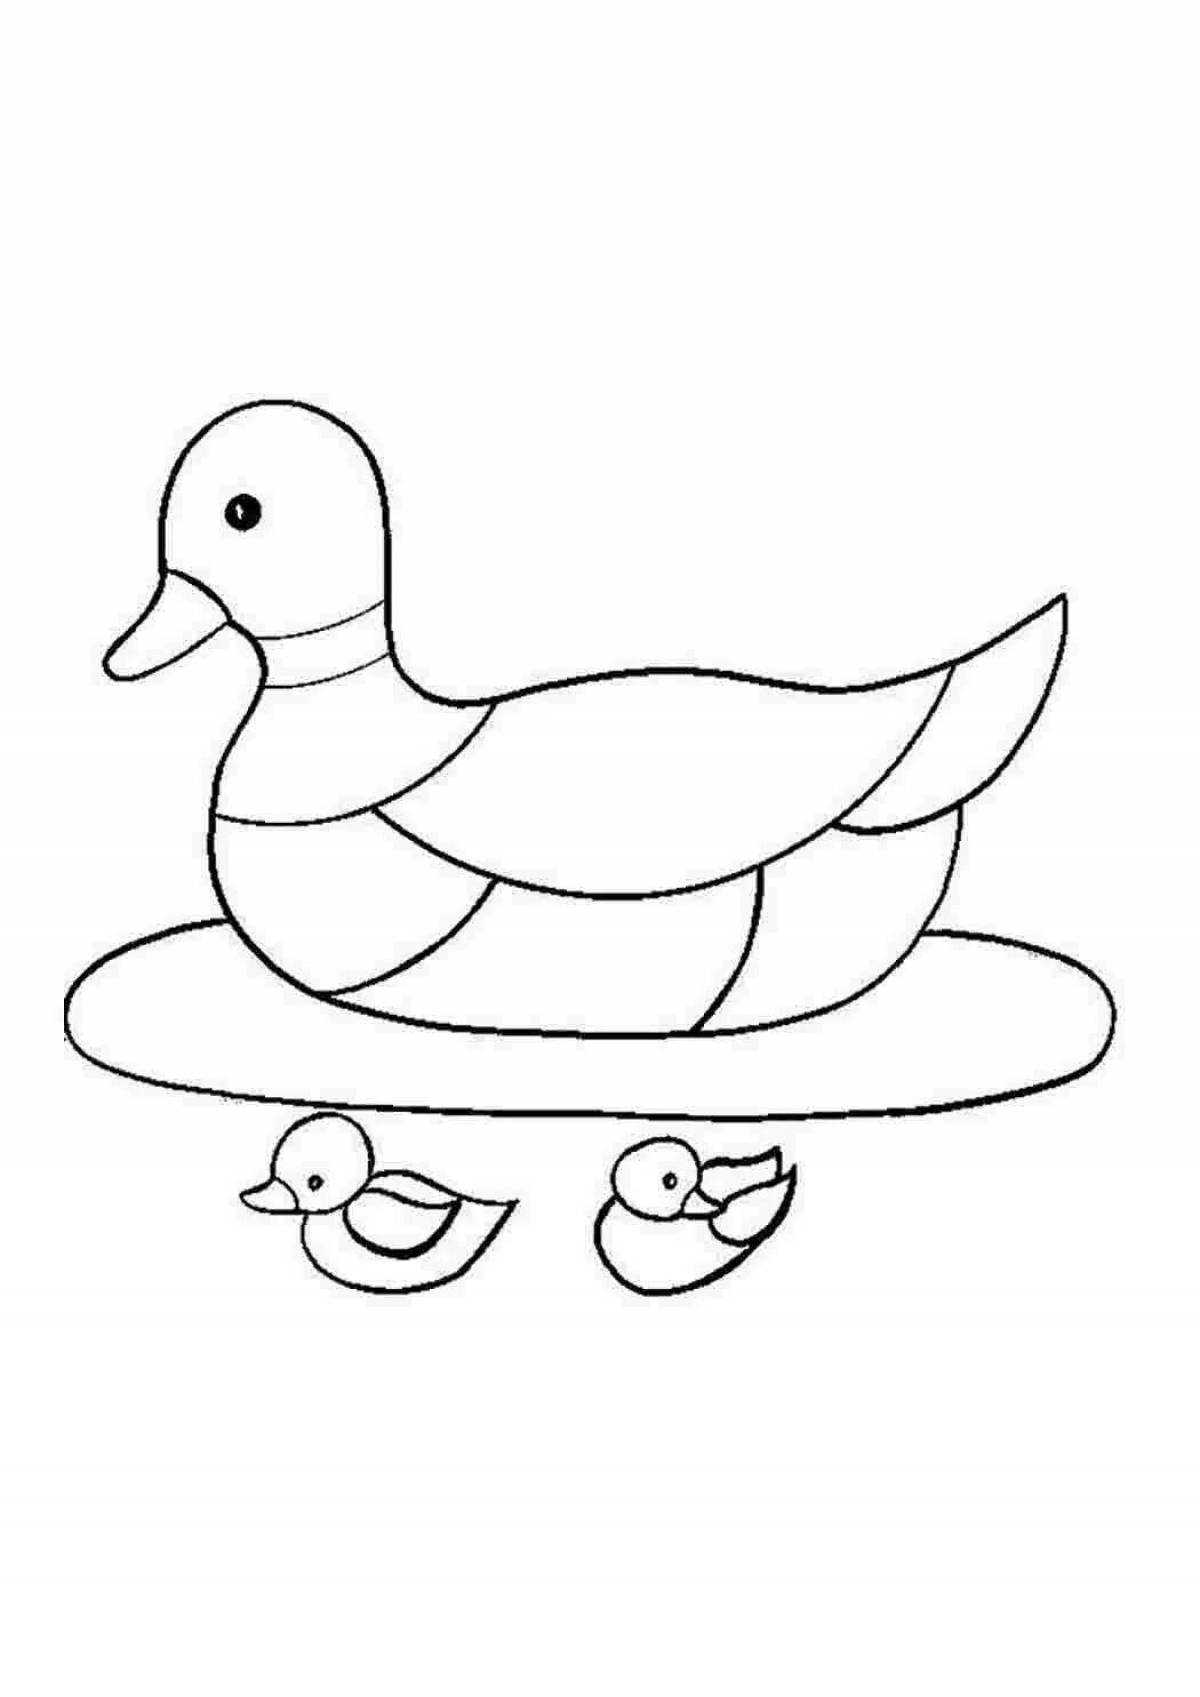 An unusual Dymkovo toy duck coloring for kids